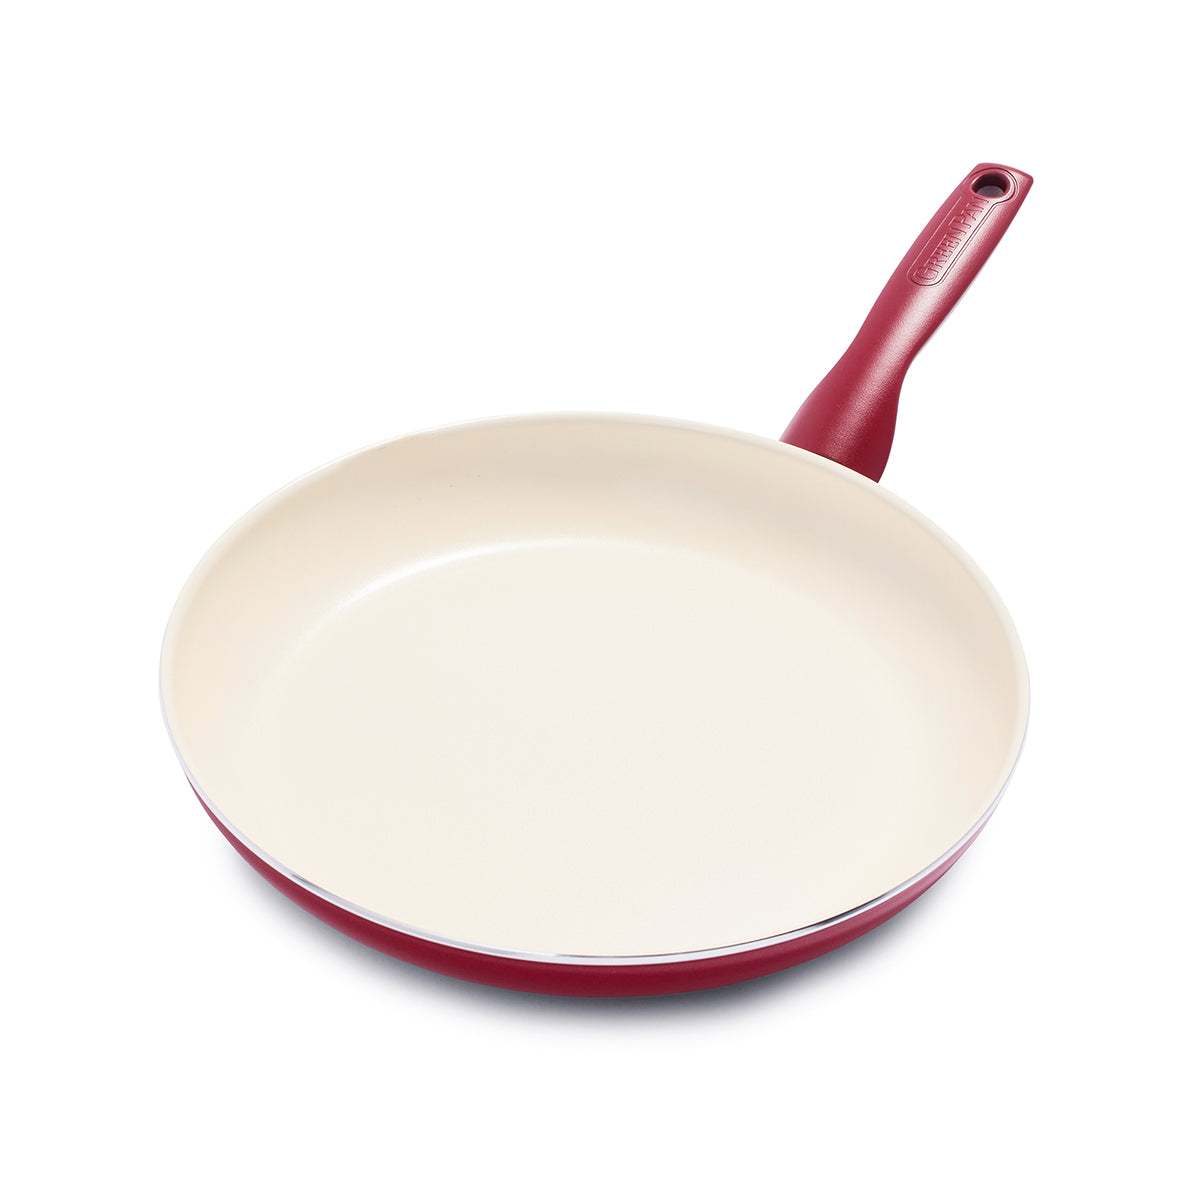 Choice 7 Aluminum Non-Stick Fry Pan with Red Silicone Handle